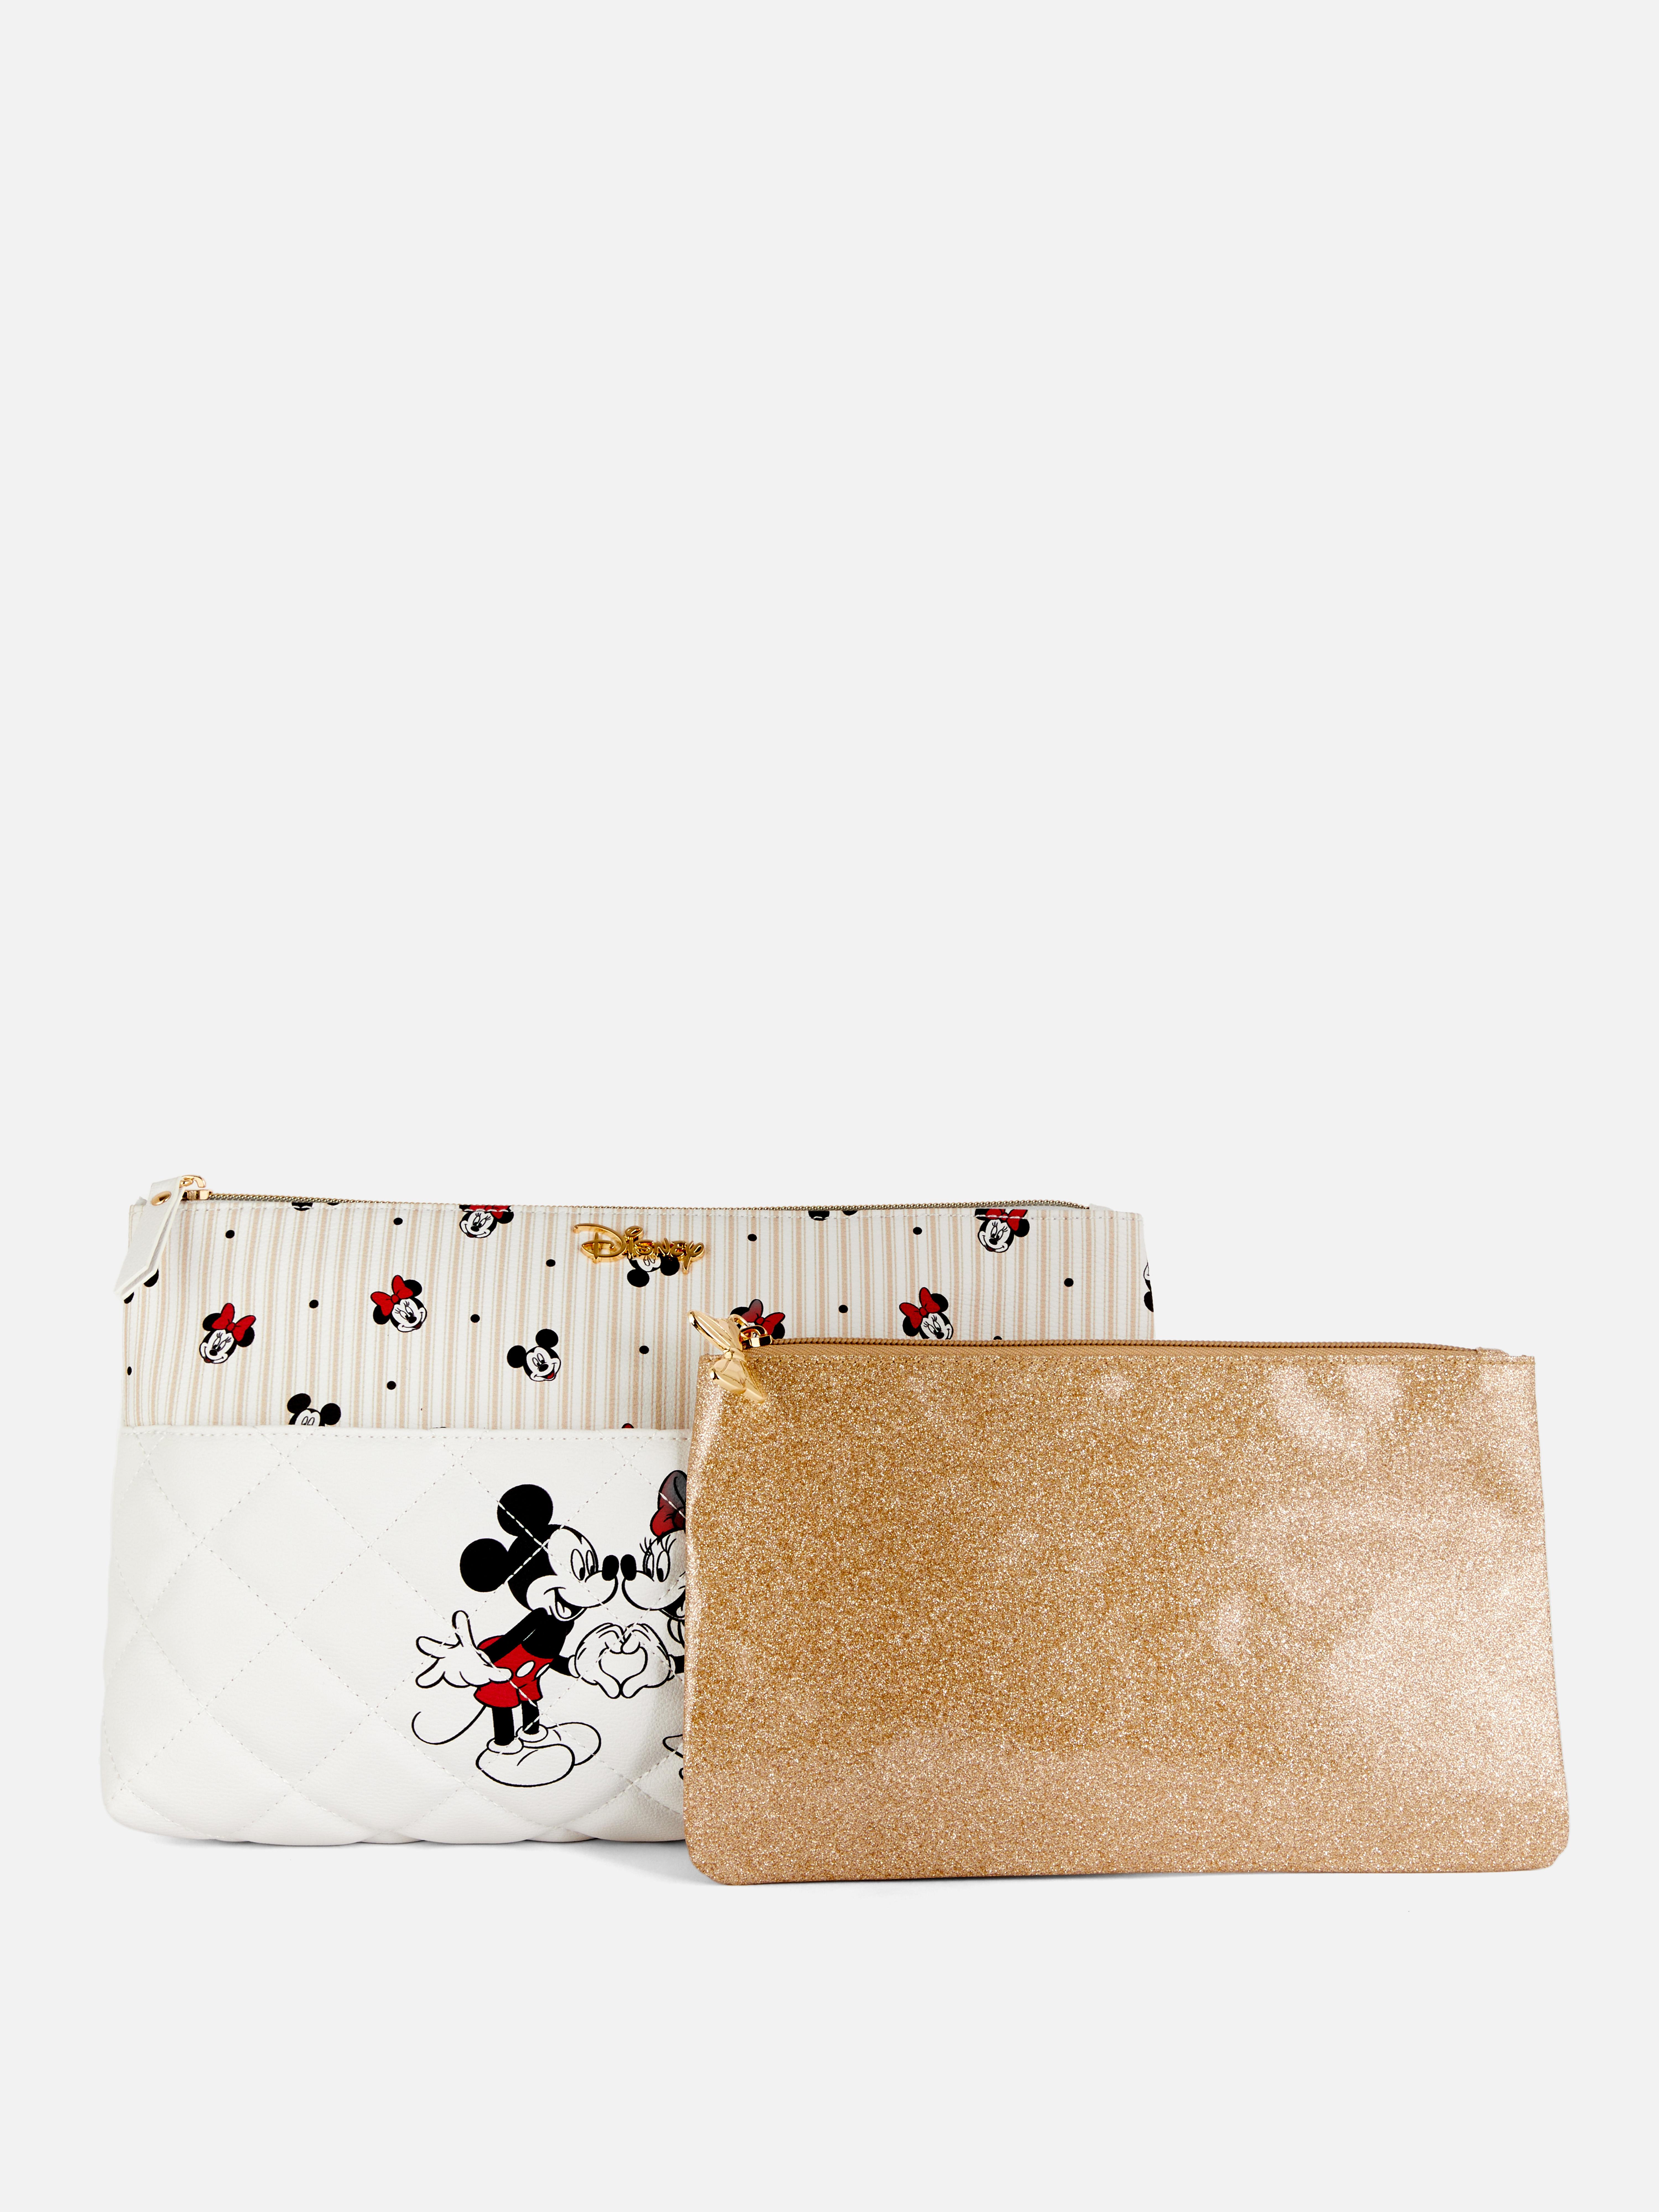 Disney's Mickey Mouse and Minnie Mouse Two-In-One Makeup Bag Set